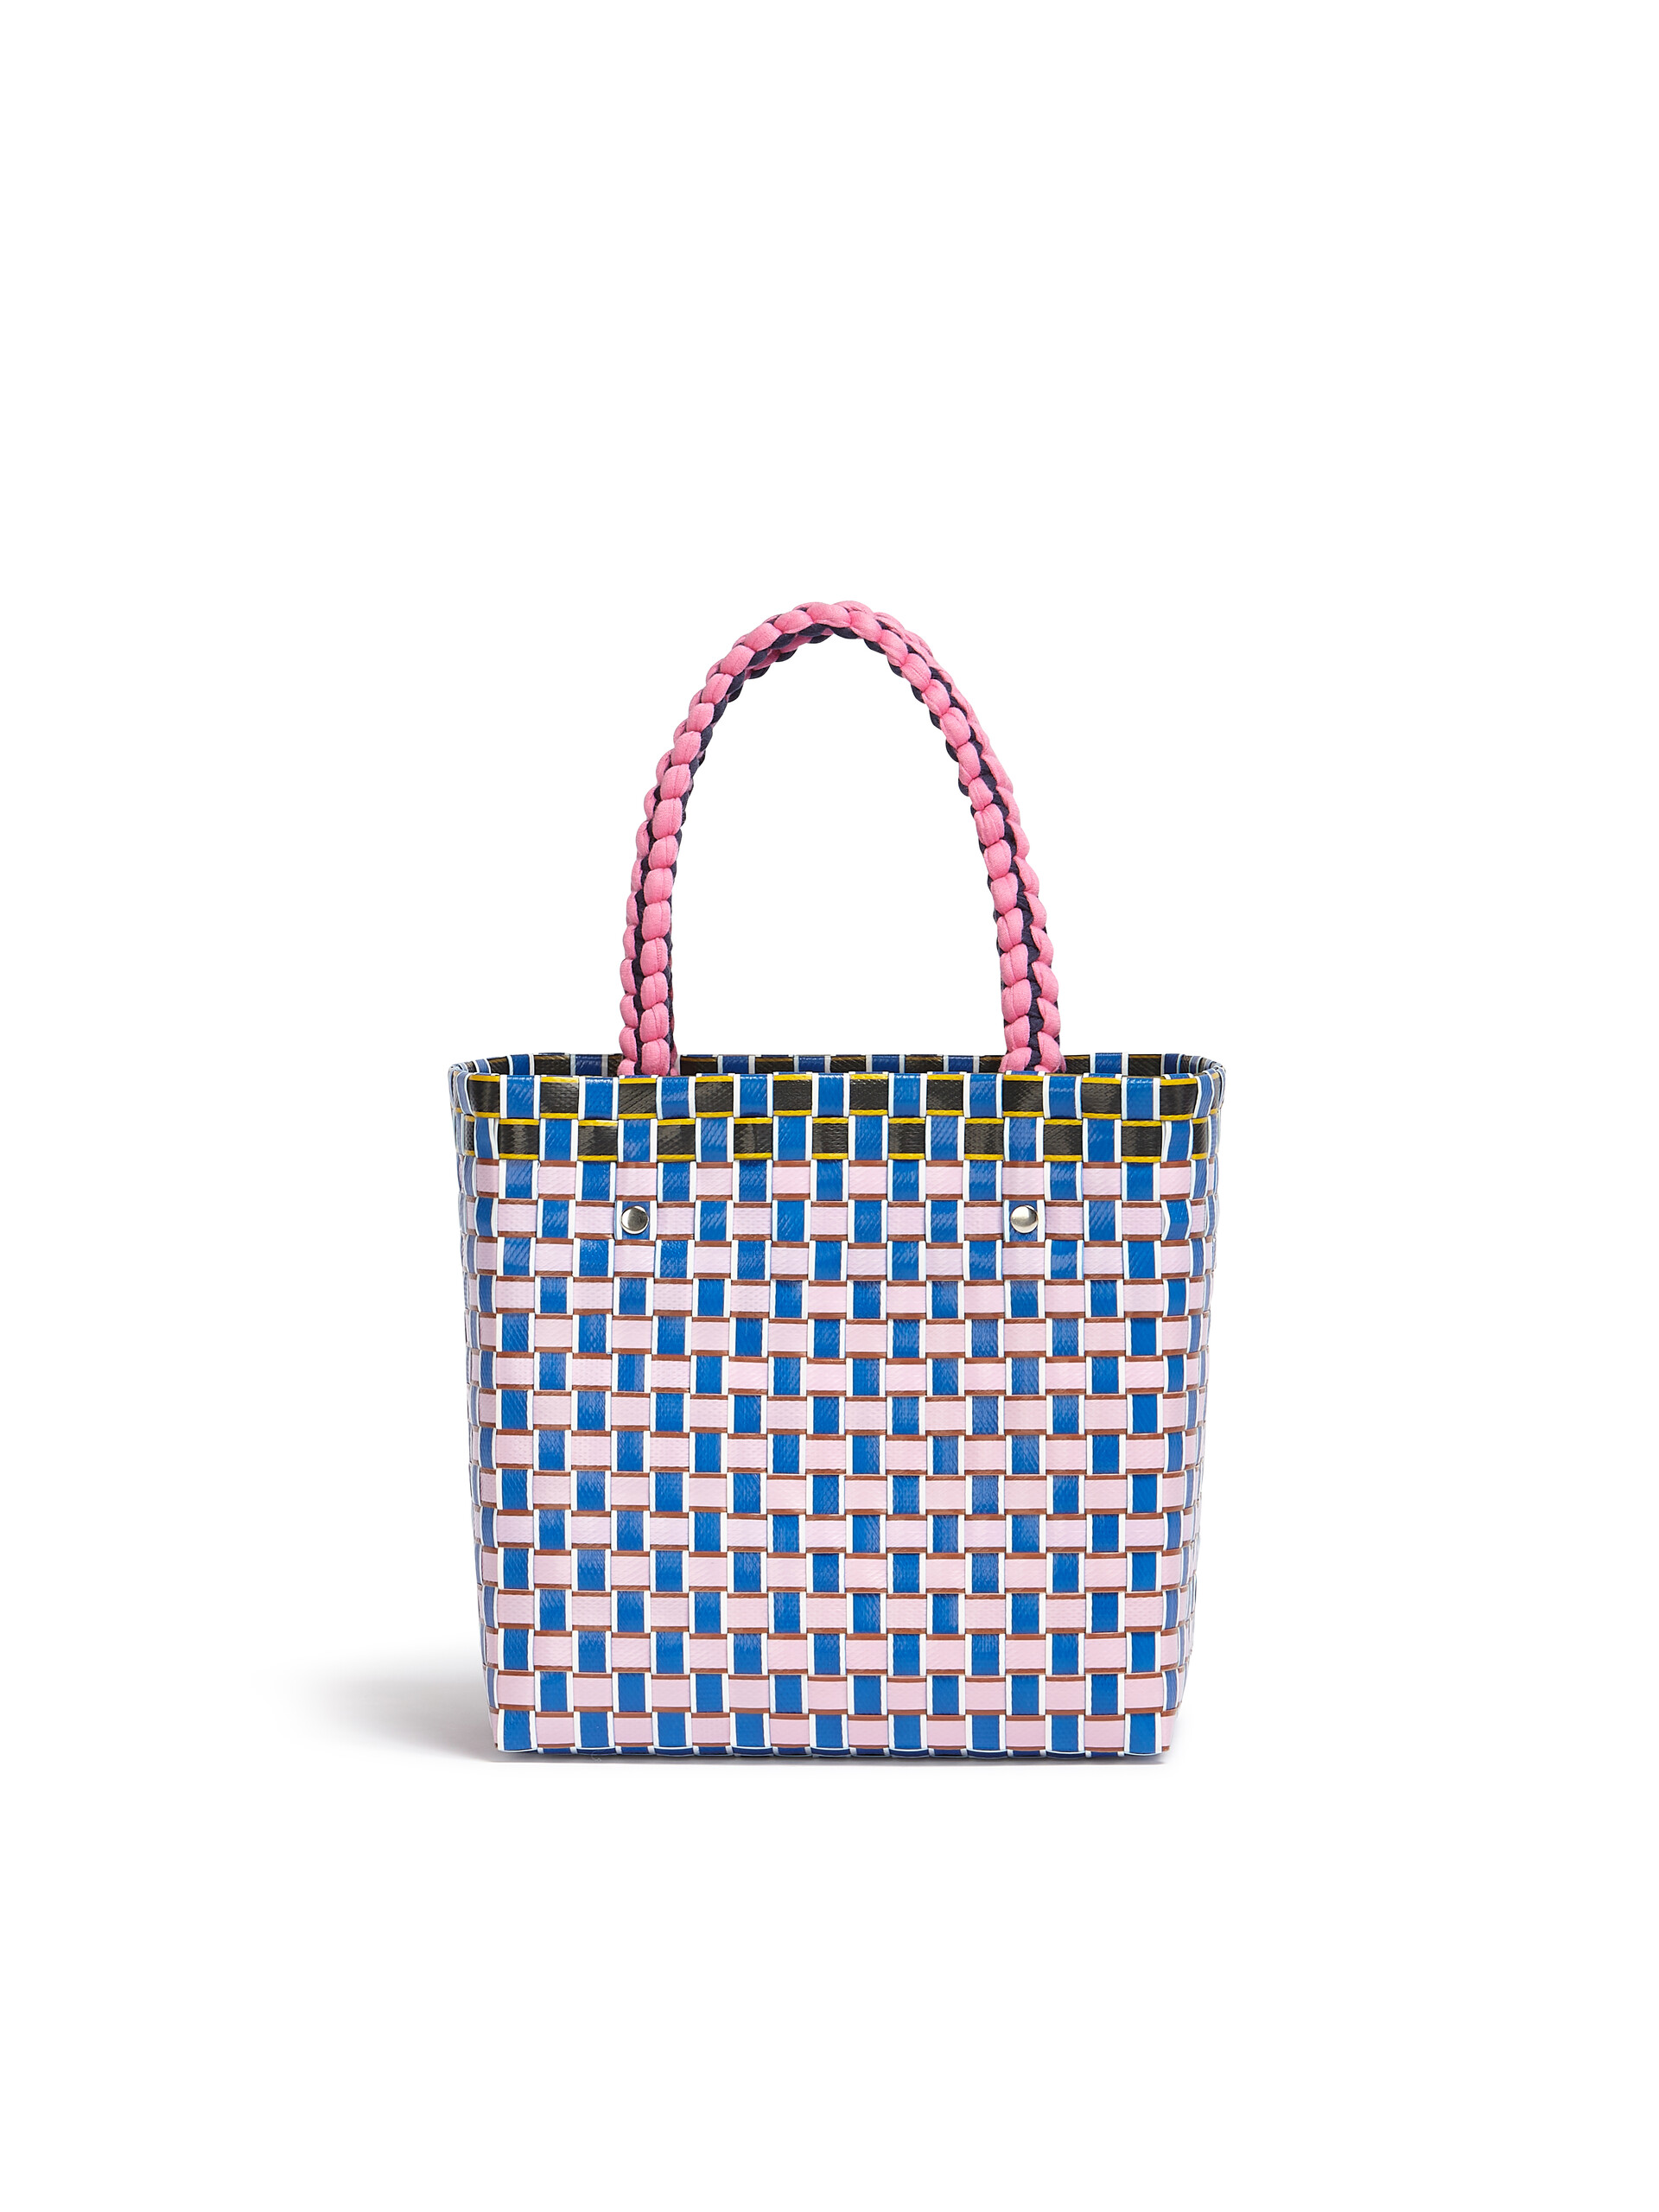 MARNI MARKET BASKET bag in pink square woven material - Bags - Image 3